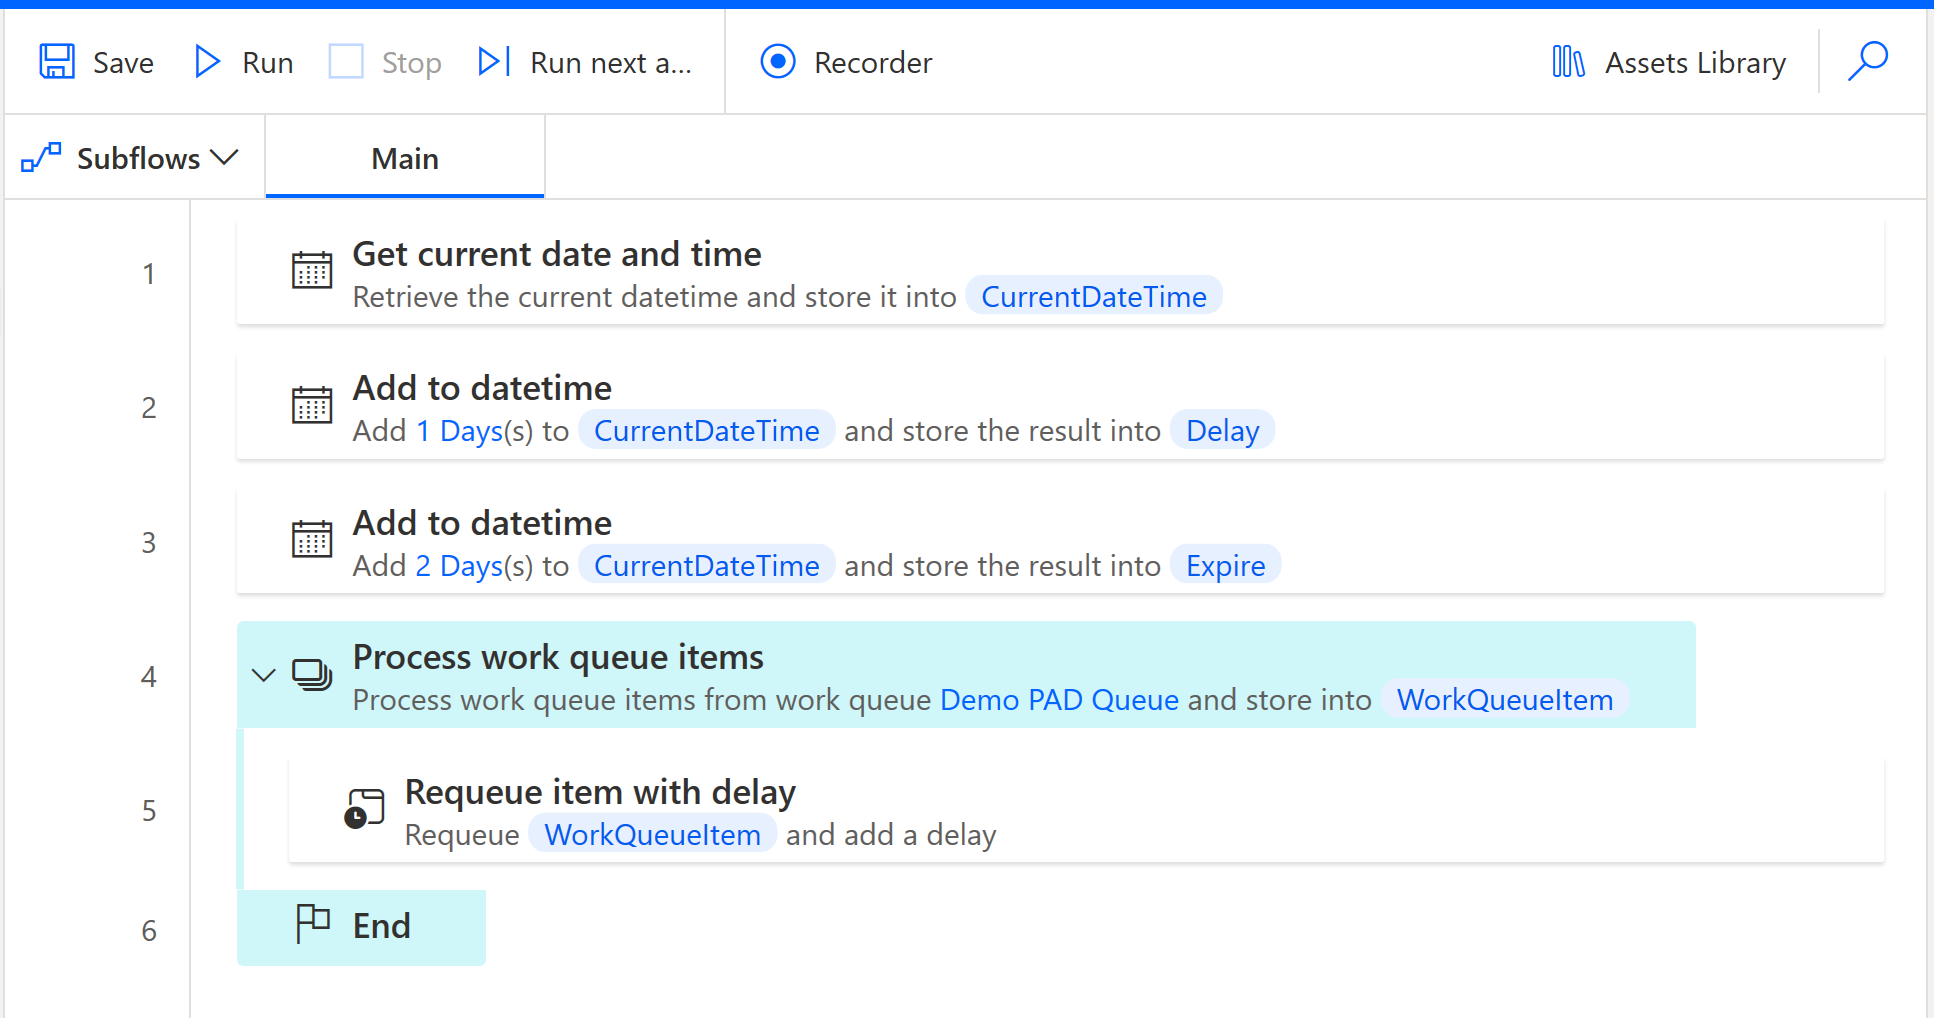 Screenshot example of process utilizing requeue item and add delay action.